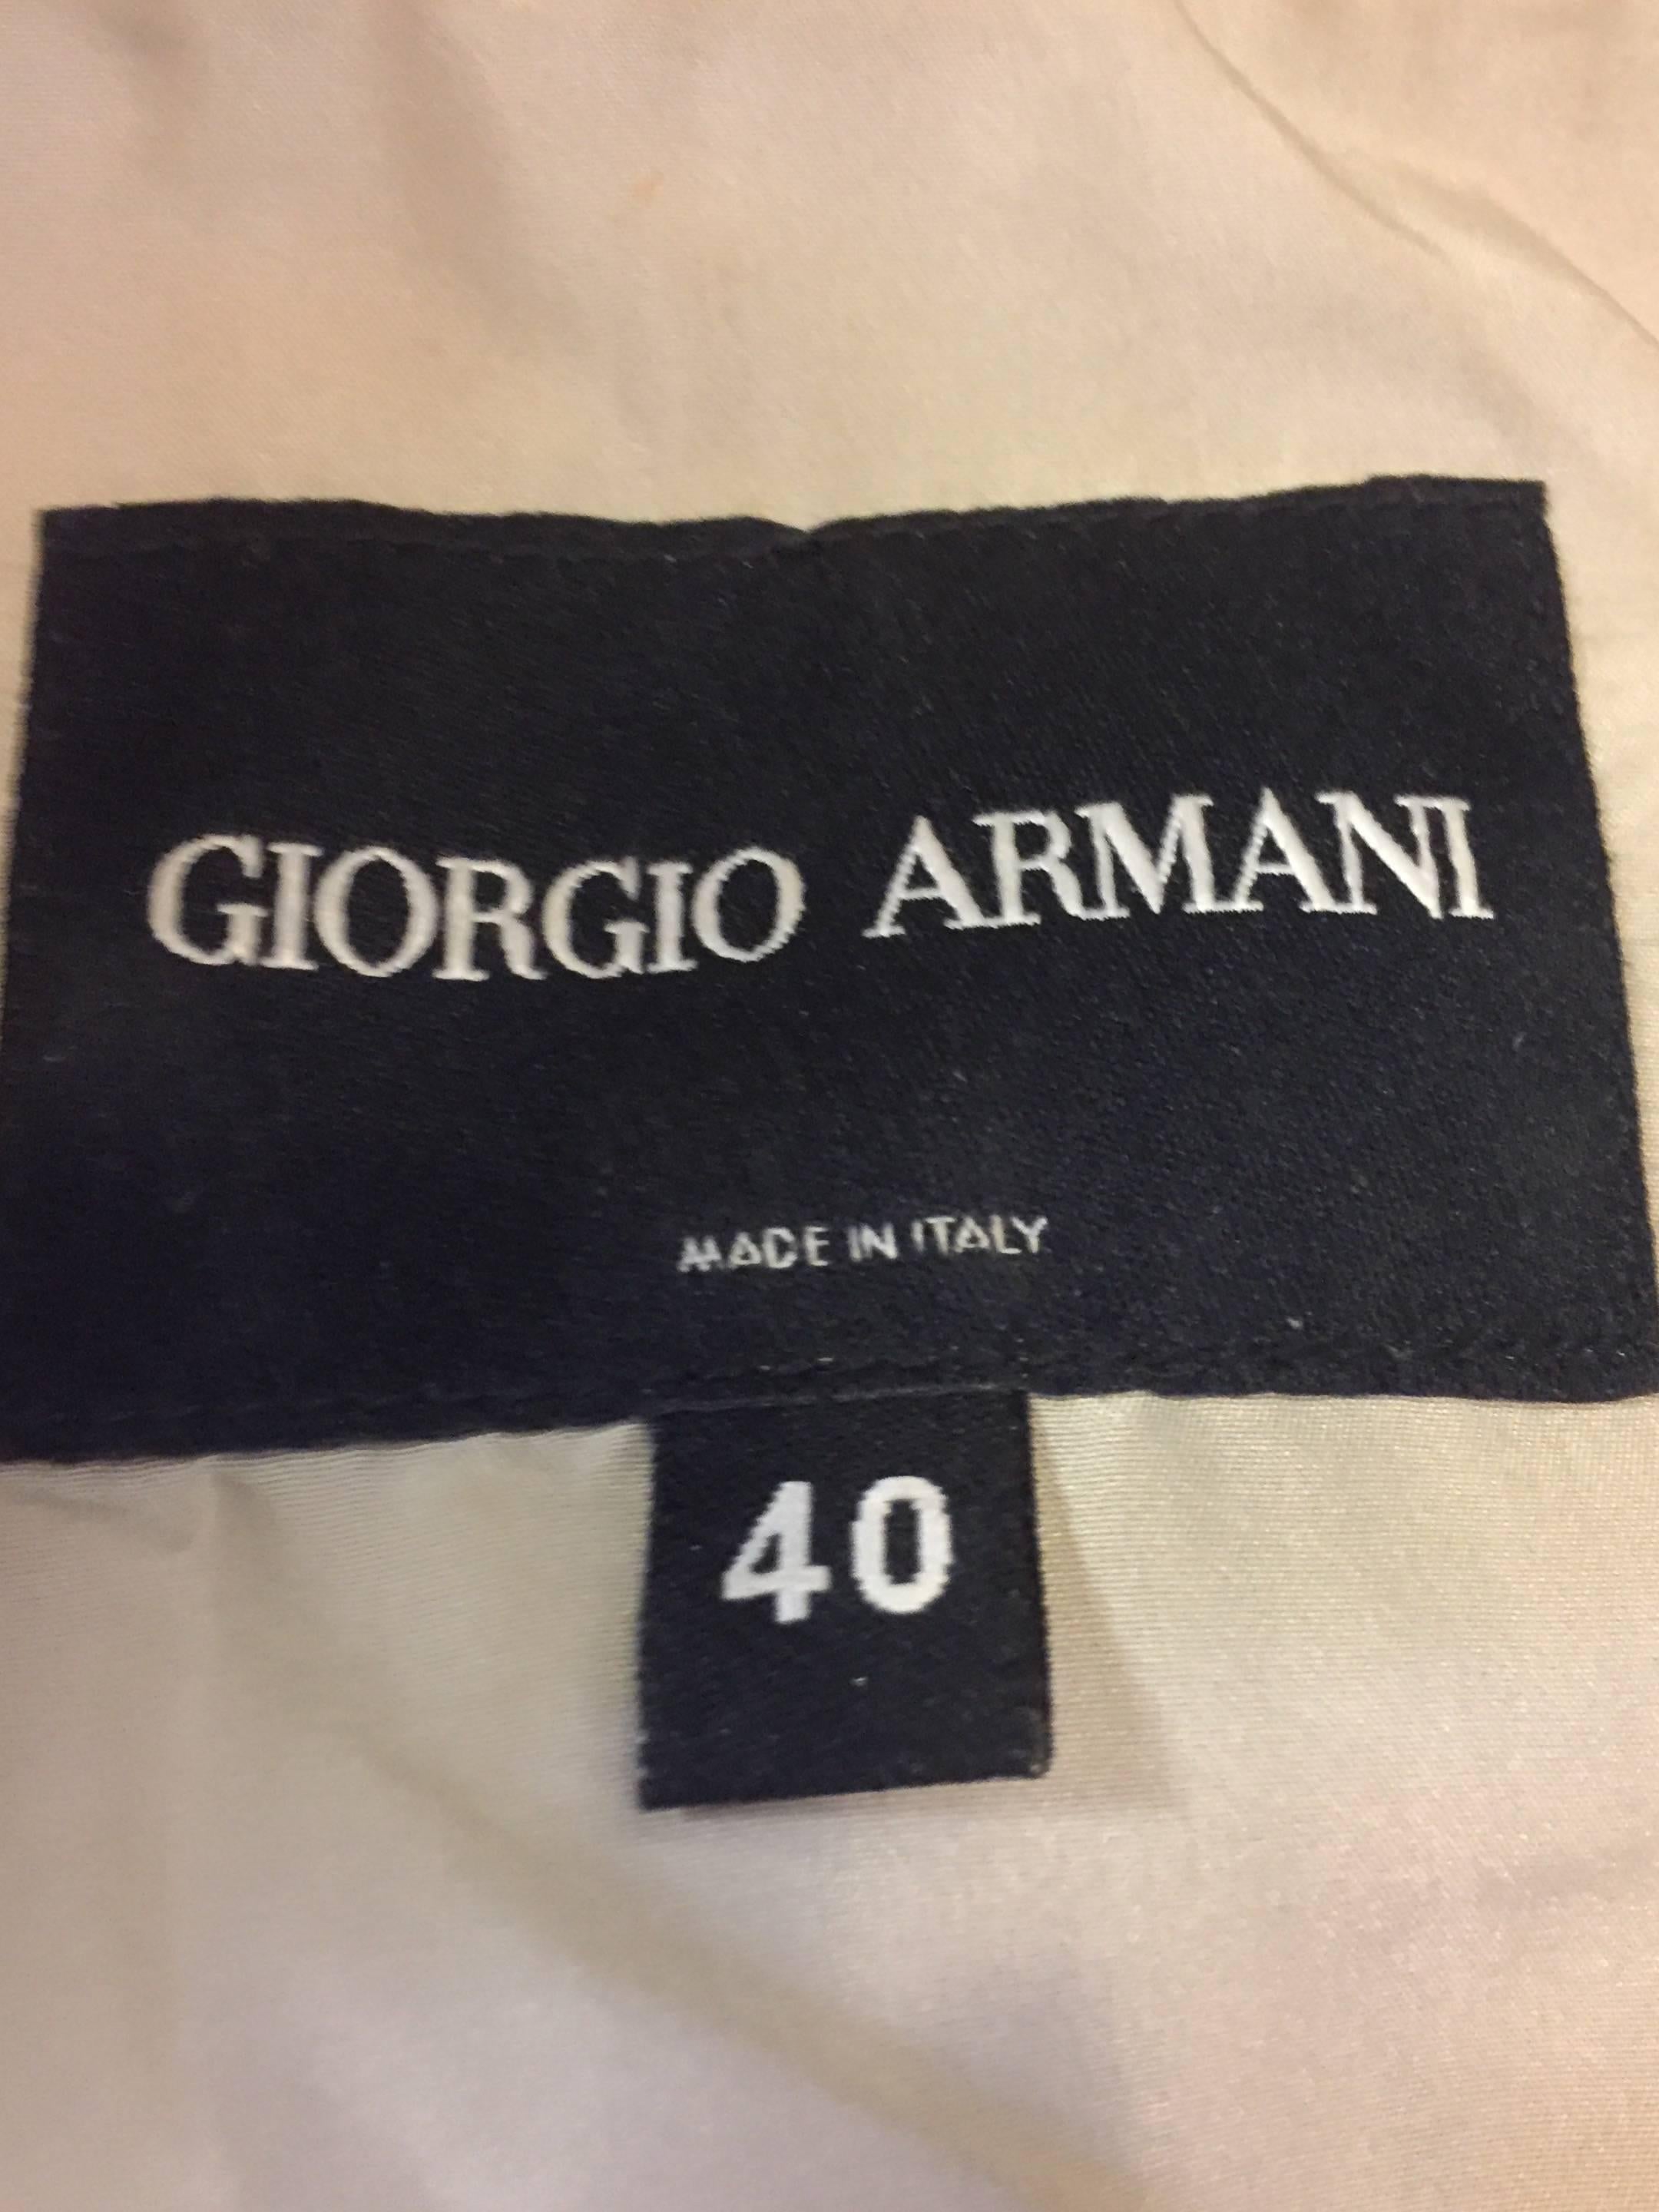 Giorgio Armani's Reptile Embossed Lambskin Trendy Jacket in Ivory and Brown   1